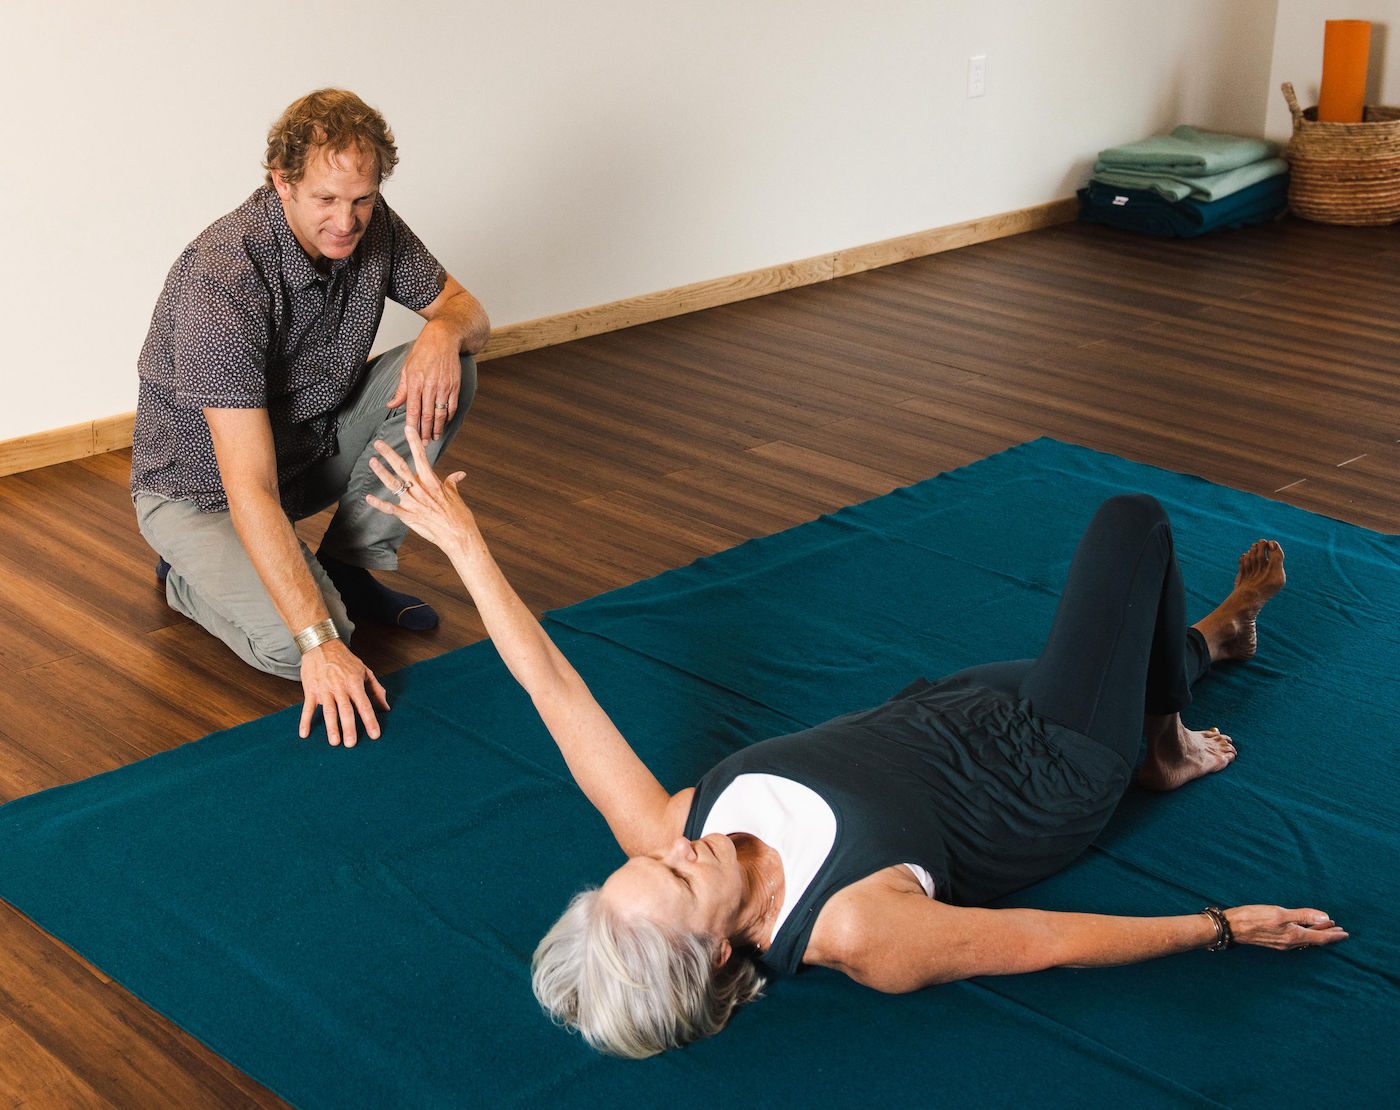 chad guiding client yoga therapy at yoga highlands studio